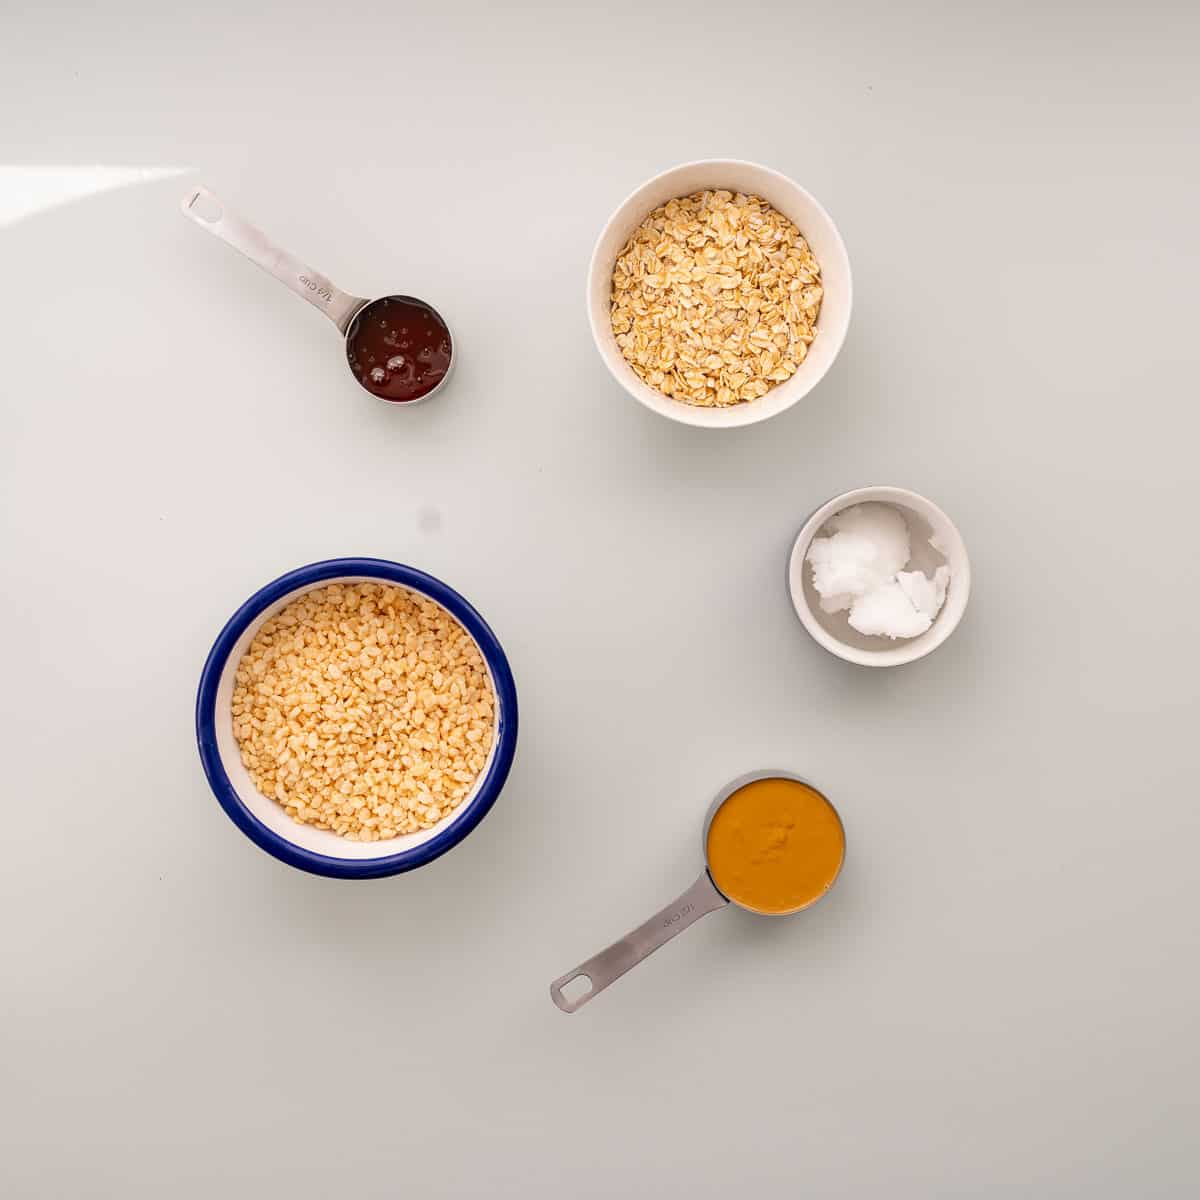 Honey, coconut oil, peanut butter, rice bubbles and rolled oats in bowls and measuring cups on a bench top.